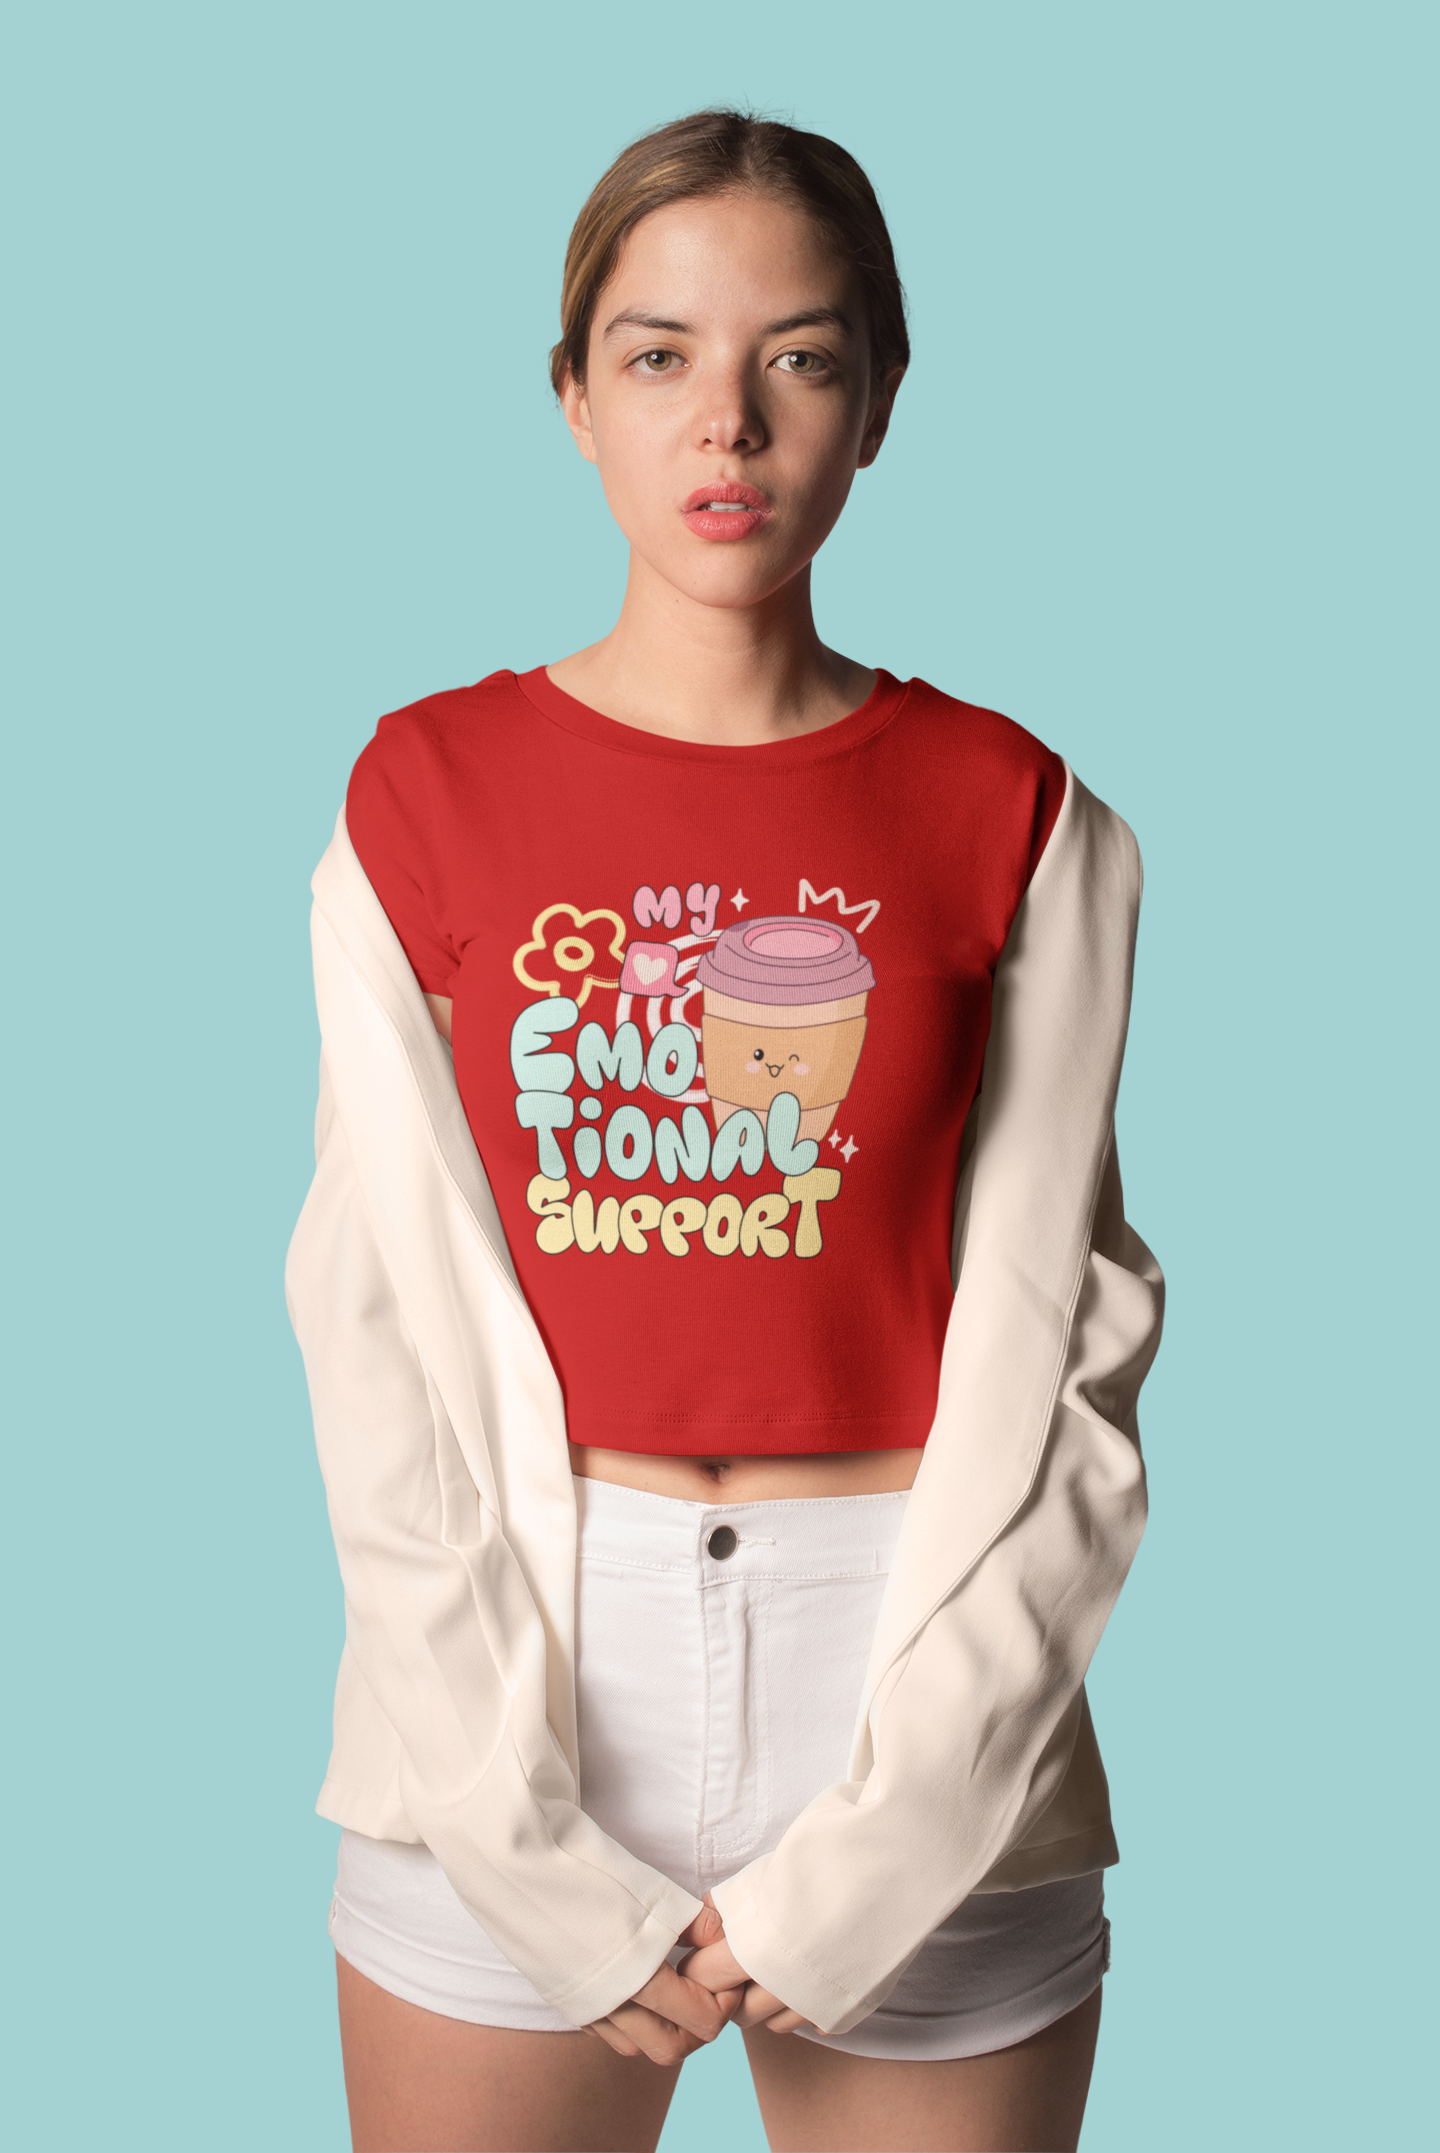 My Emotional Support Coffee Crop Top by Cute Stuff Co. 180 GSM